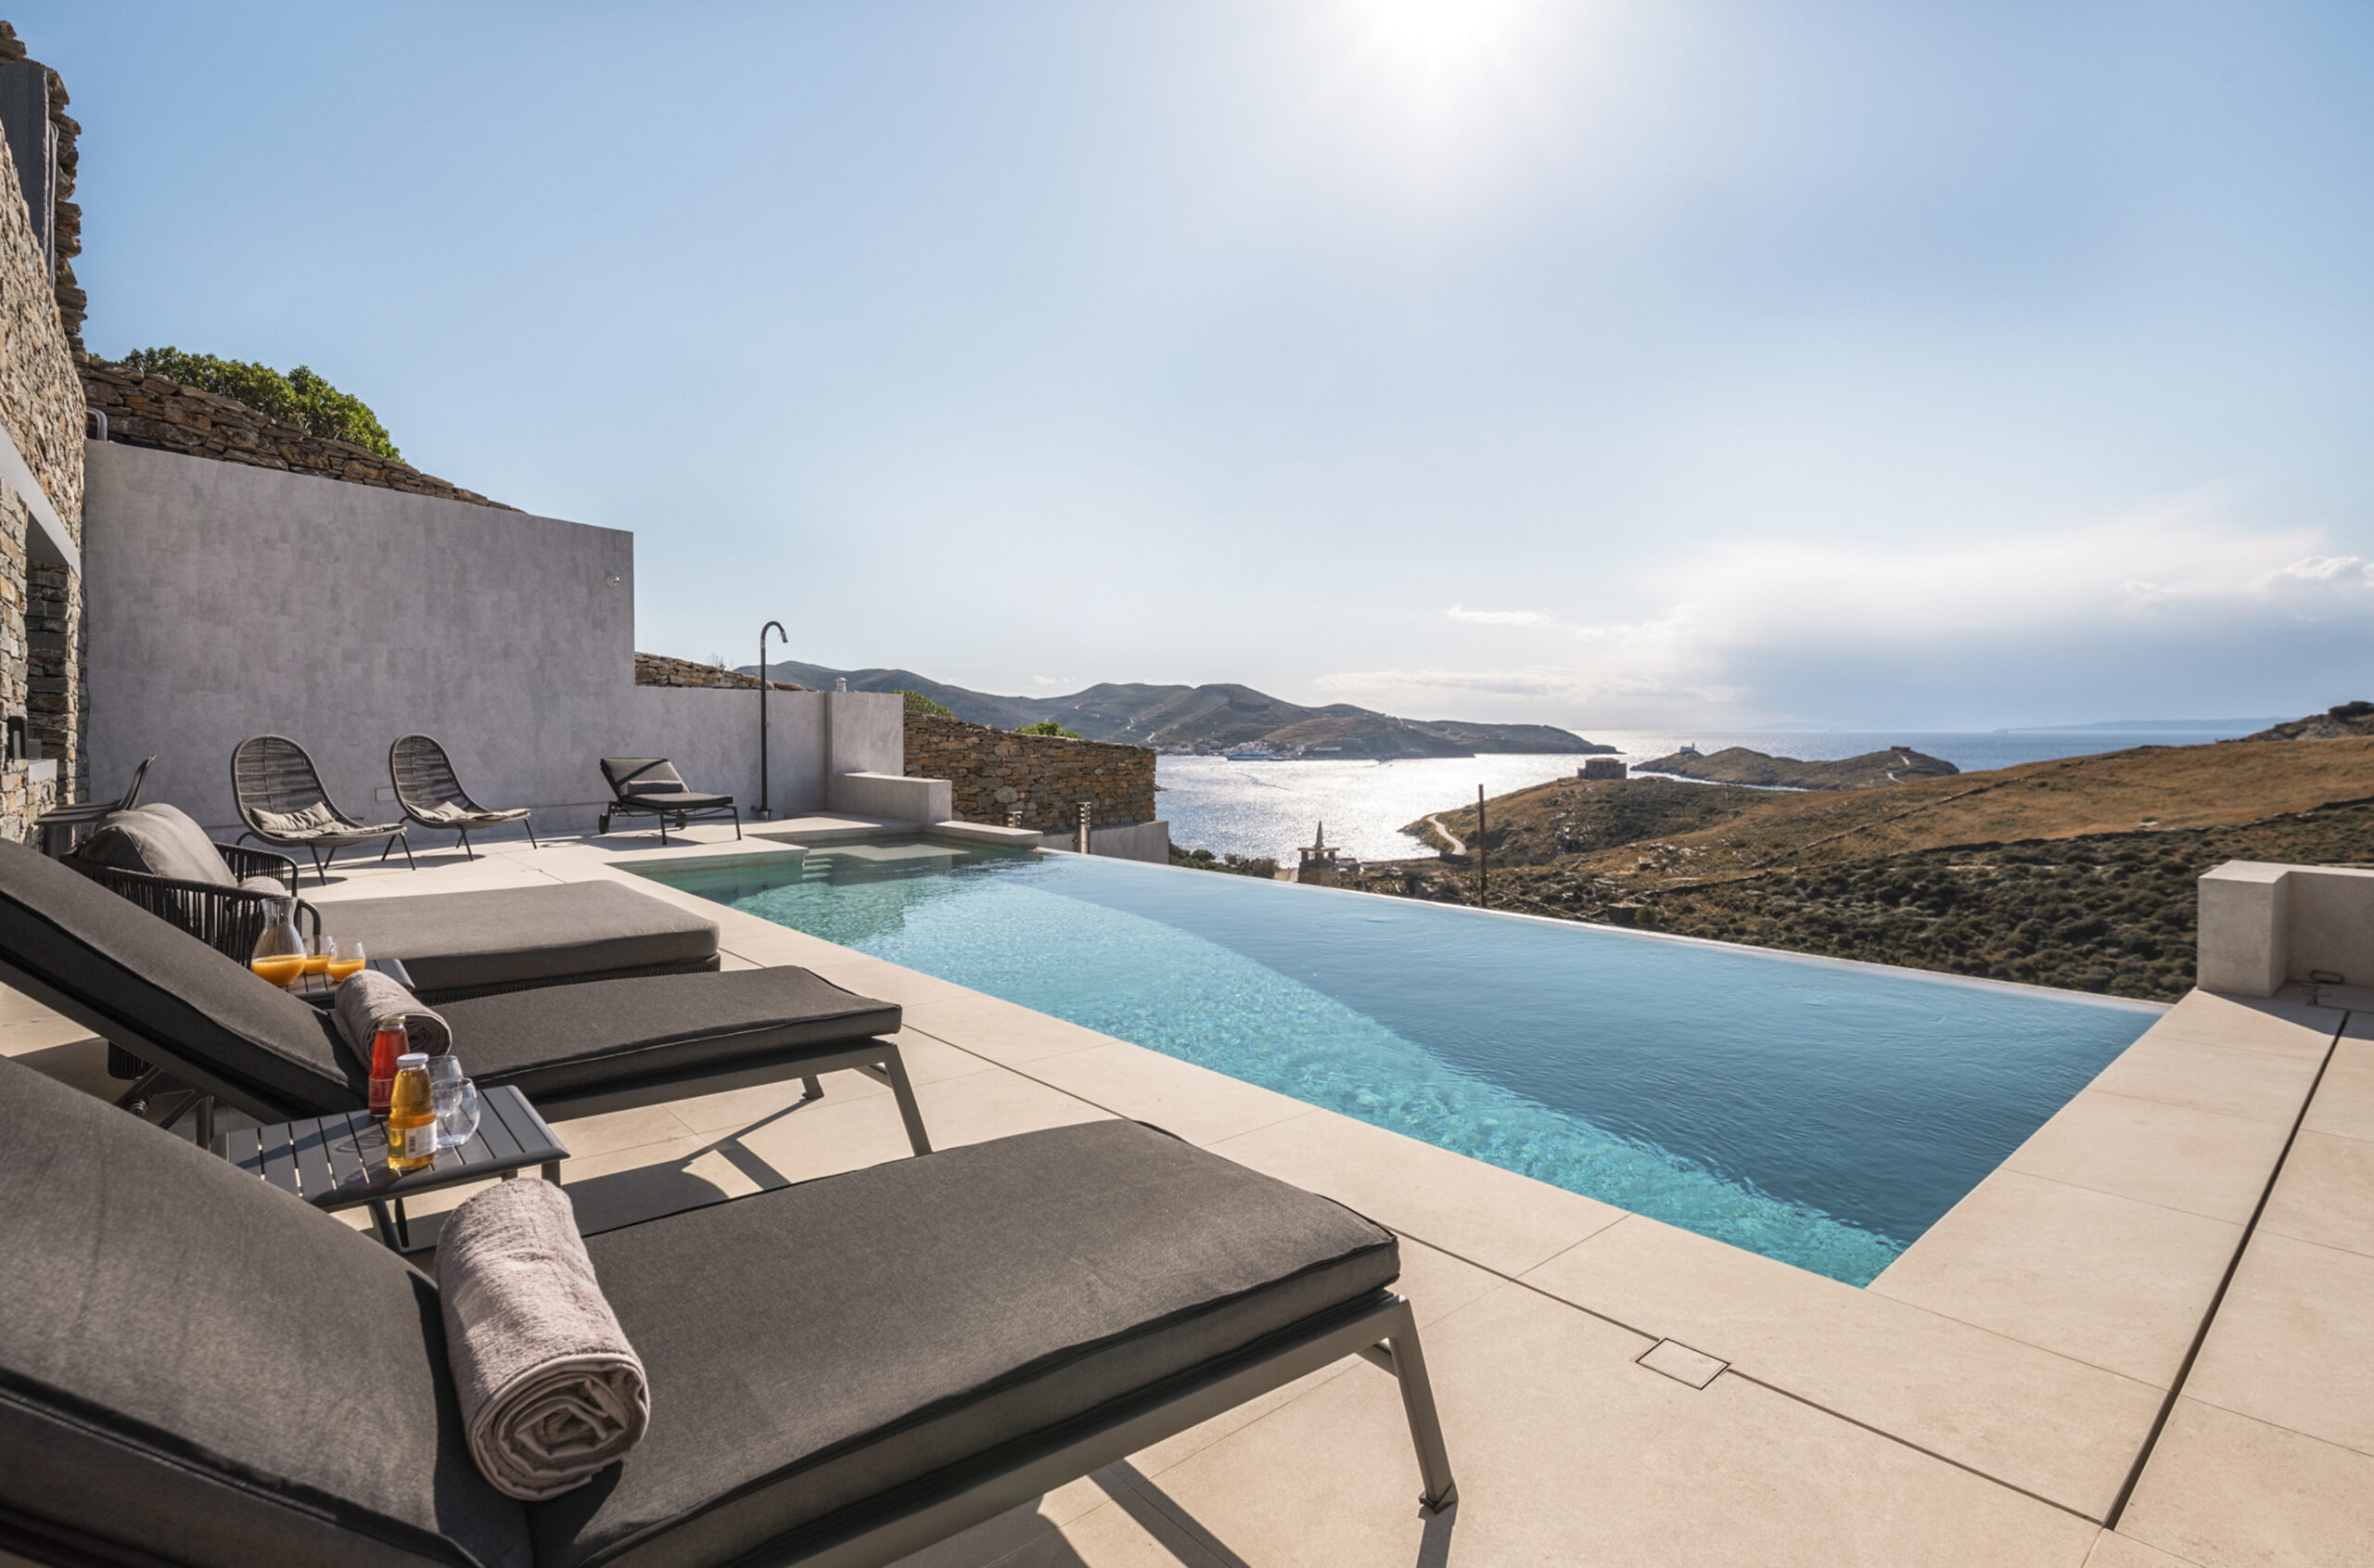 Luxury Villas to rent on Kea, exceptionally picturesque